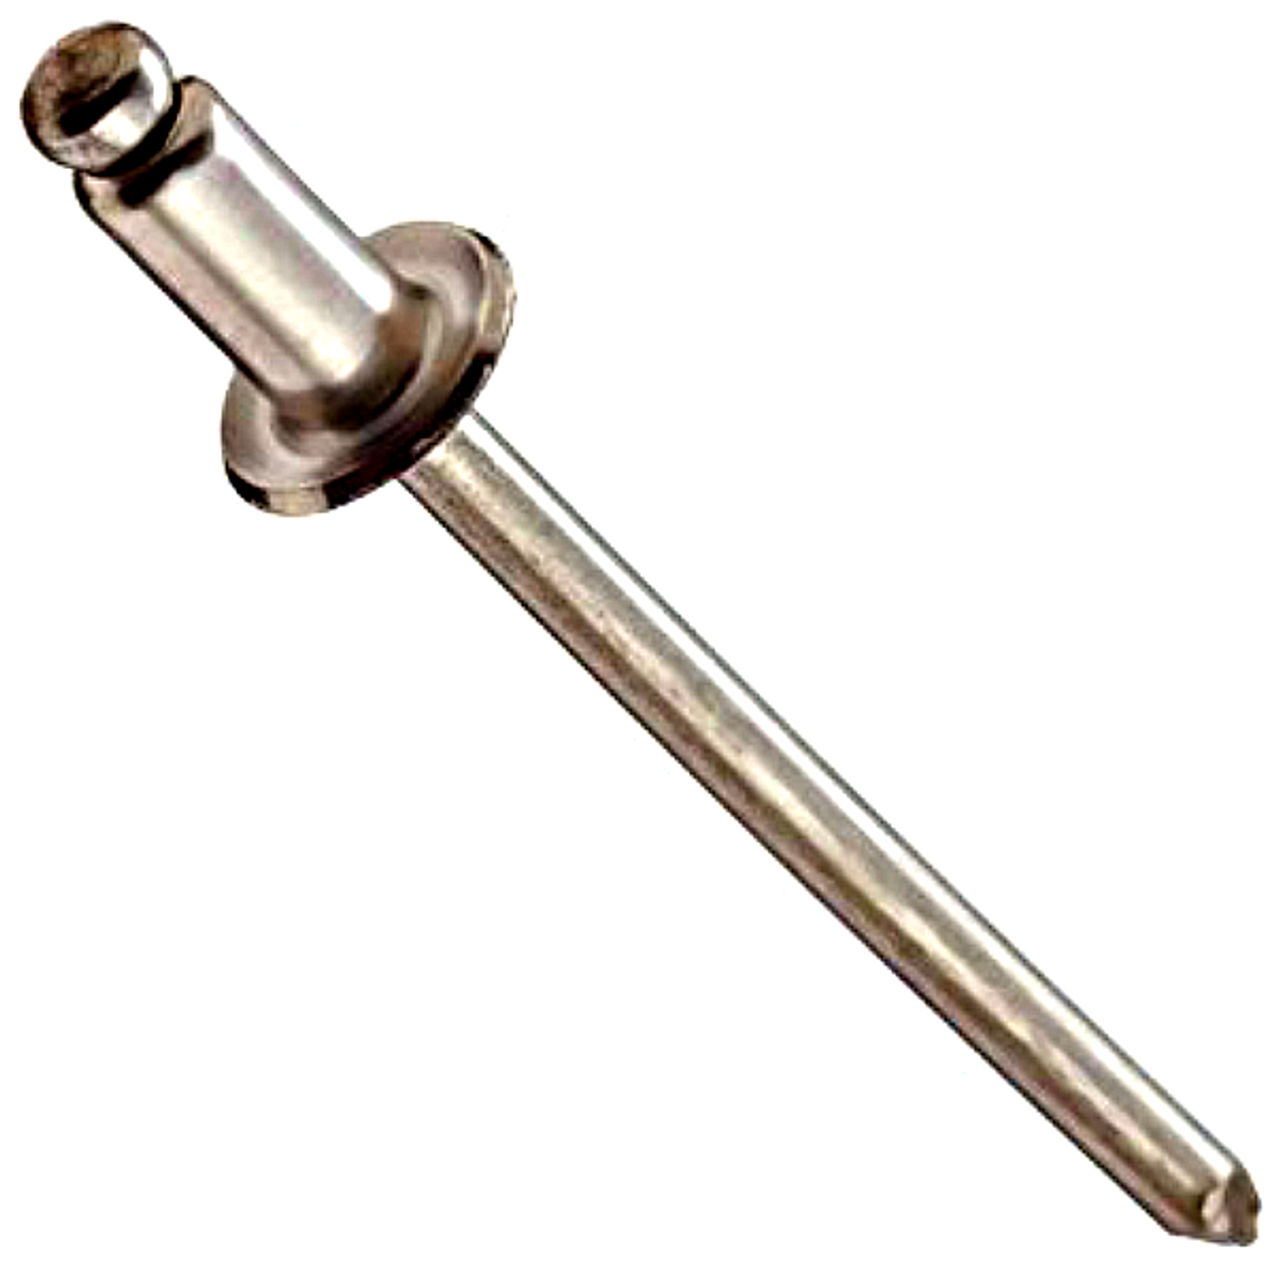 Stainless Steel Rivet-Stainless Steel Mandrel #46 Blind Domed Button Head Open End 1/8" .125 Qty 1000